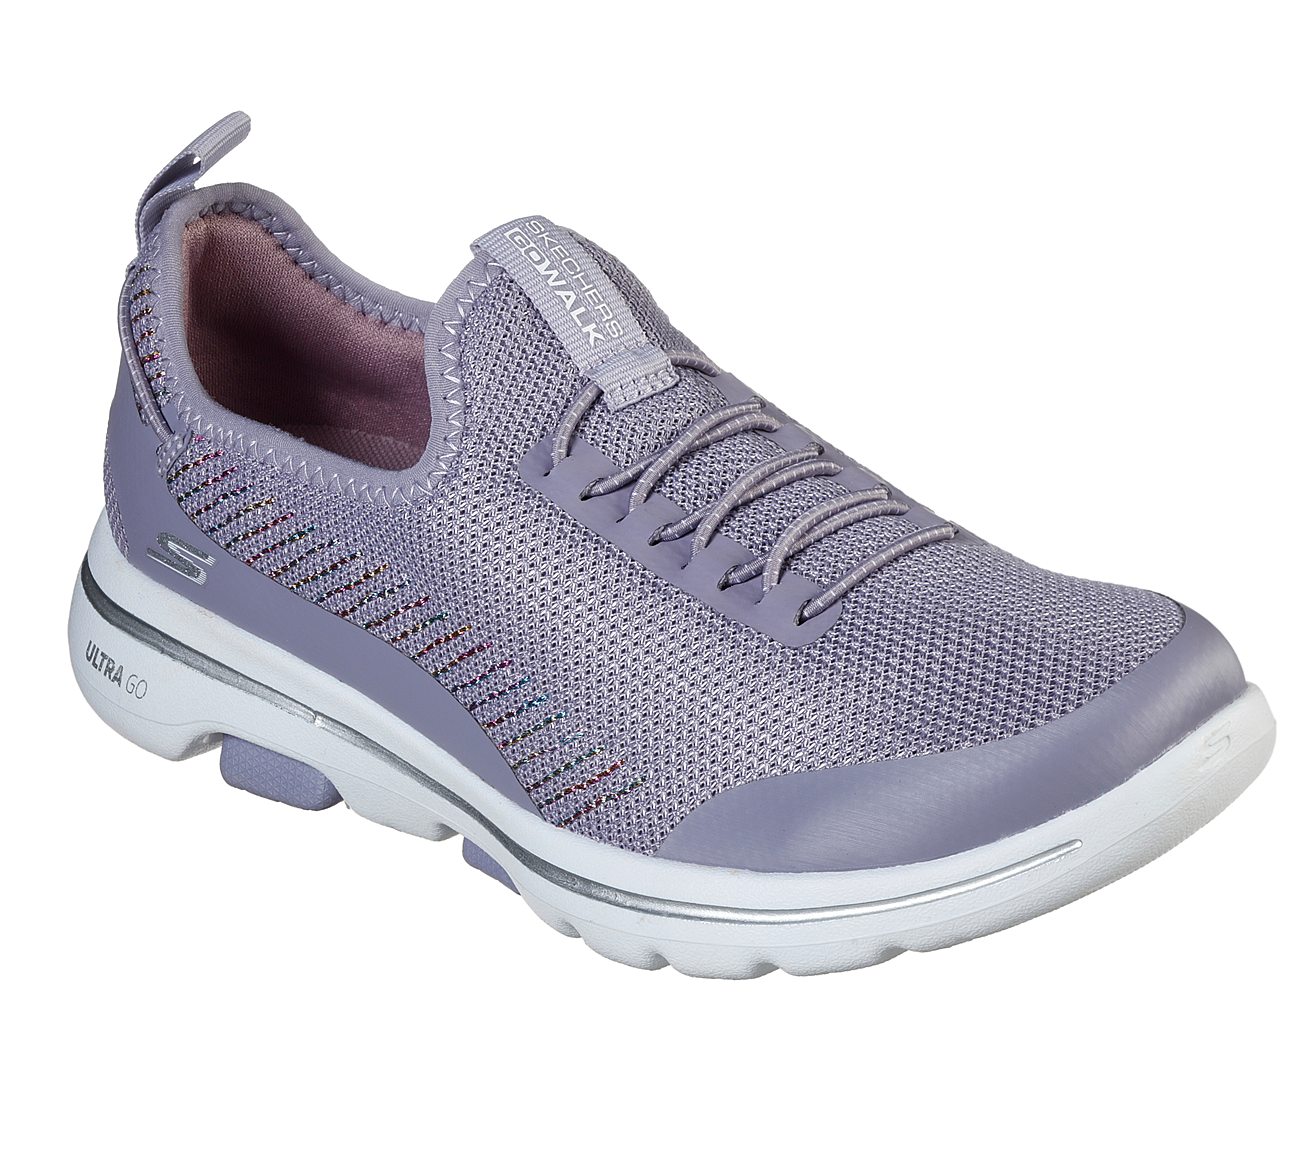 GO WALK 5-PROLIFIC, LAVENDER Footwear Lateral View